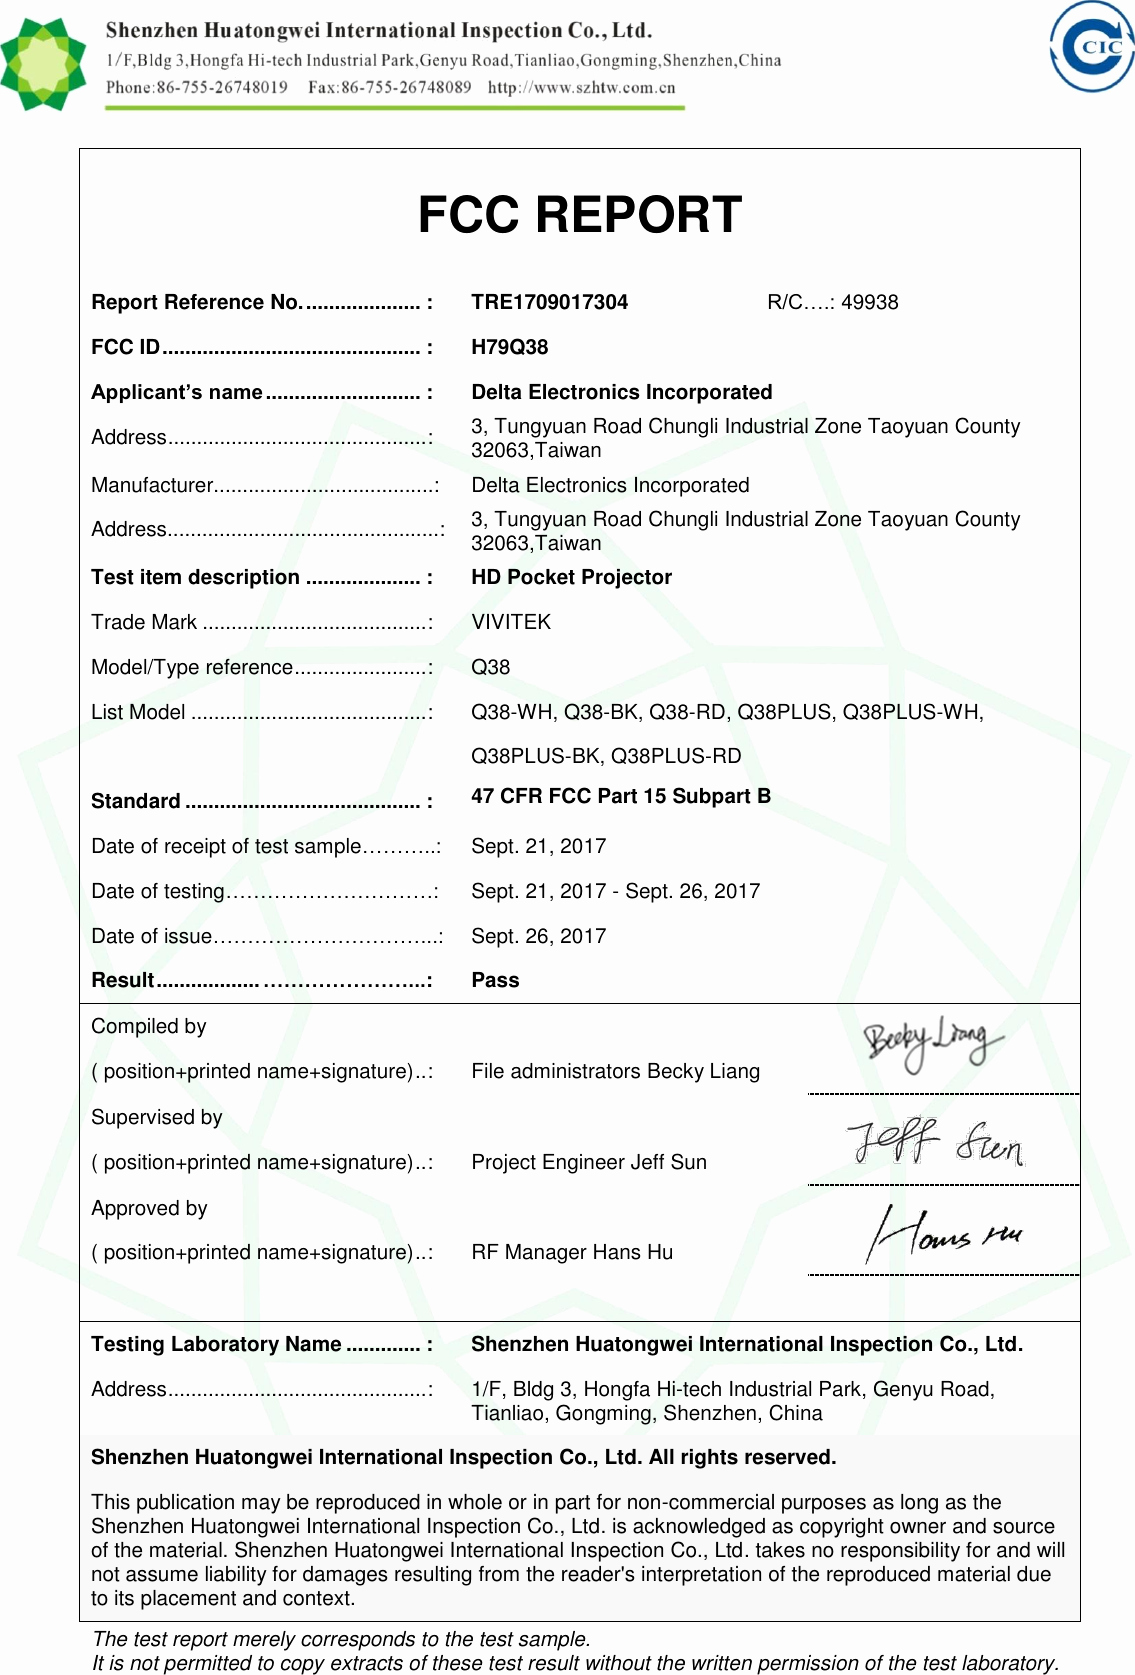 Engineering Test Report Template Awesome Engineering Test Report Template What You Should Wear to